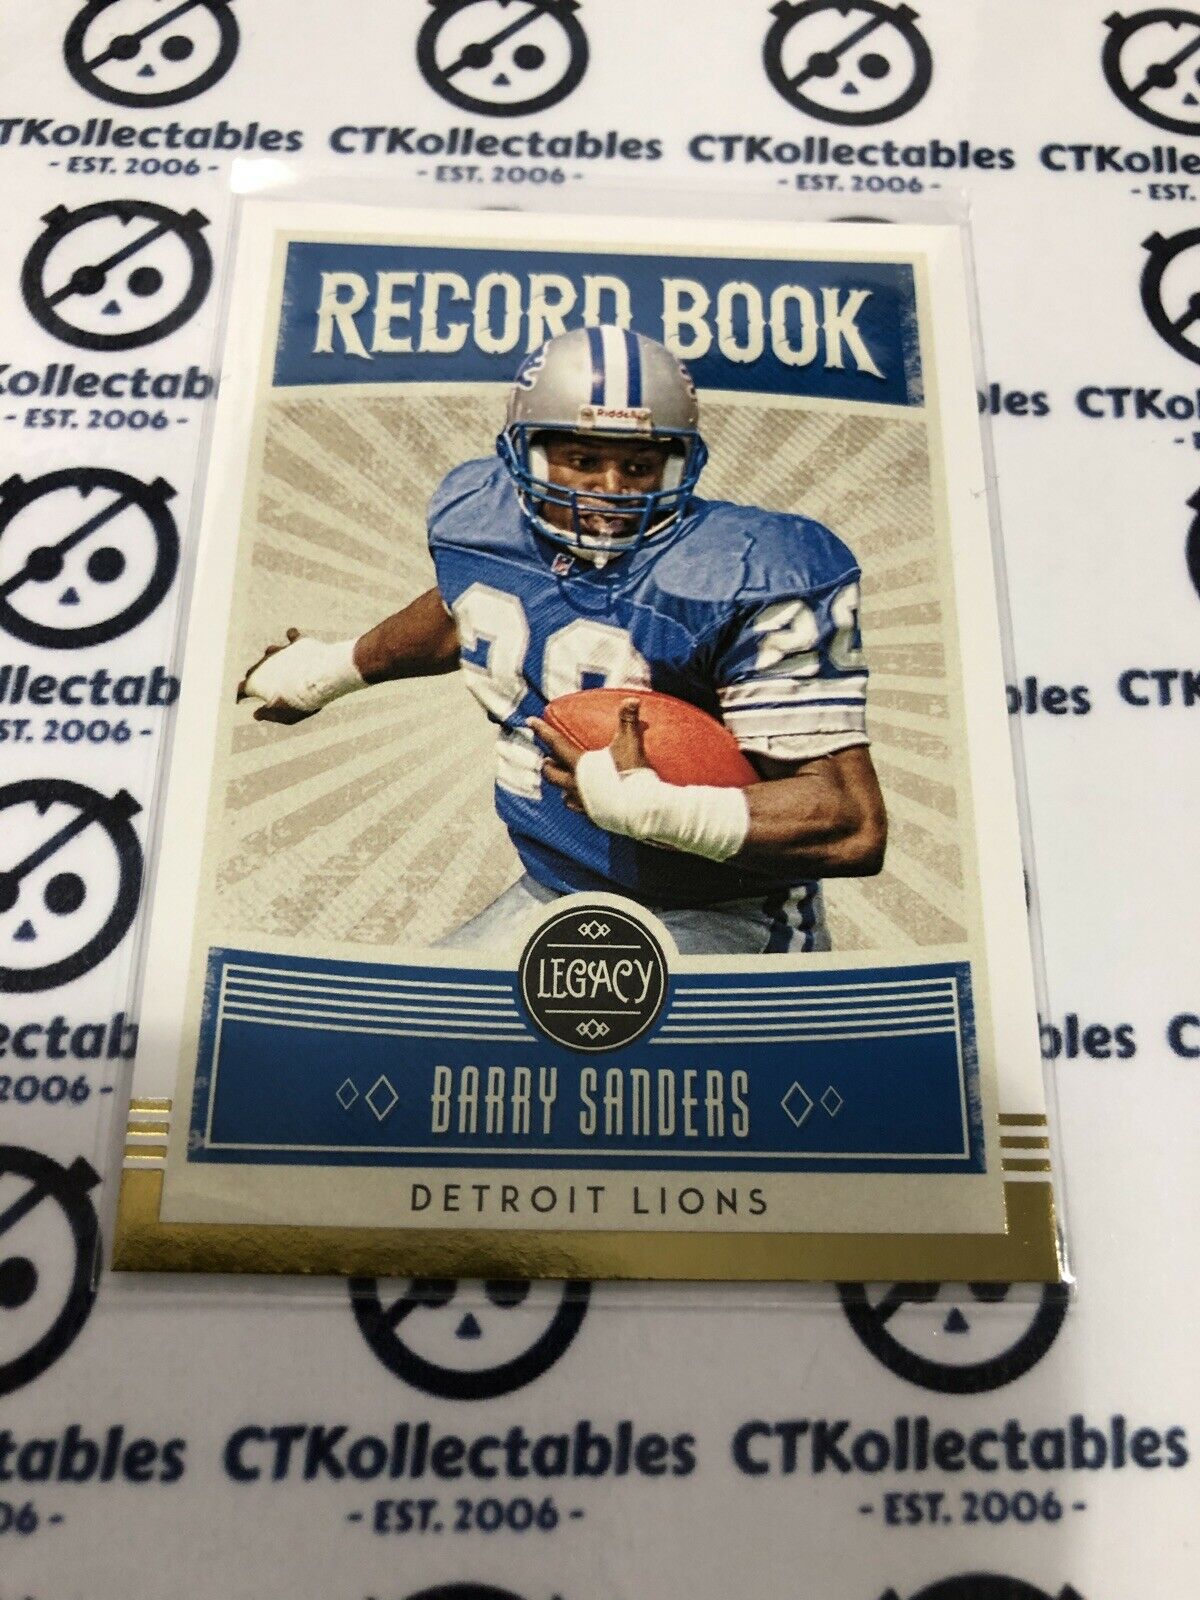 2020 NFL Legacy Barry Sanders Record Book RB-BS LIONS